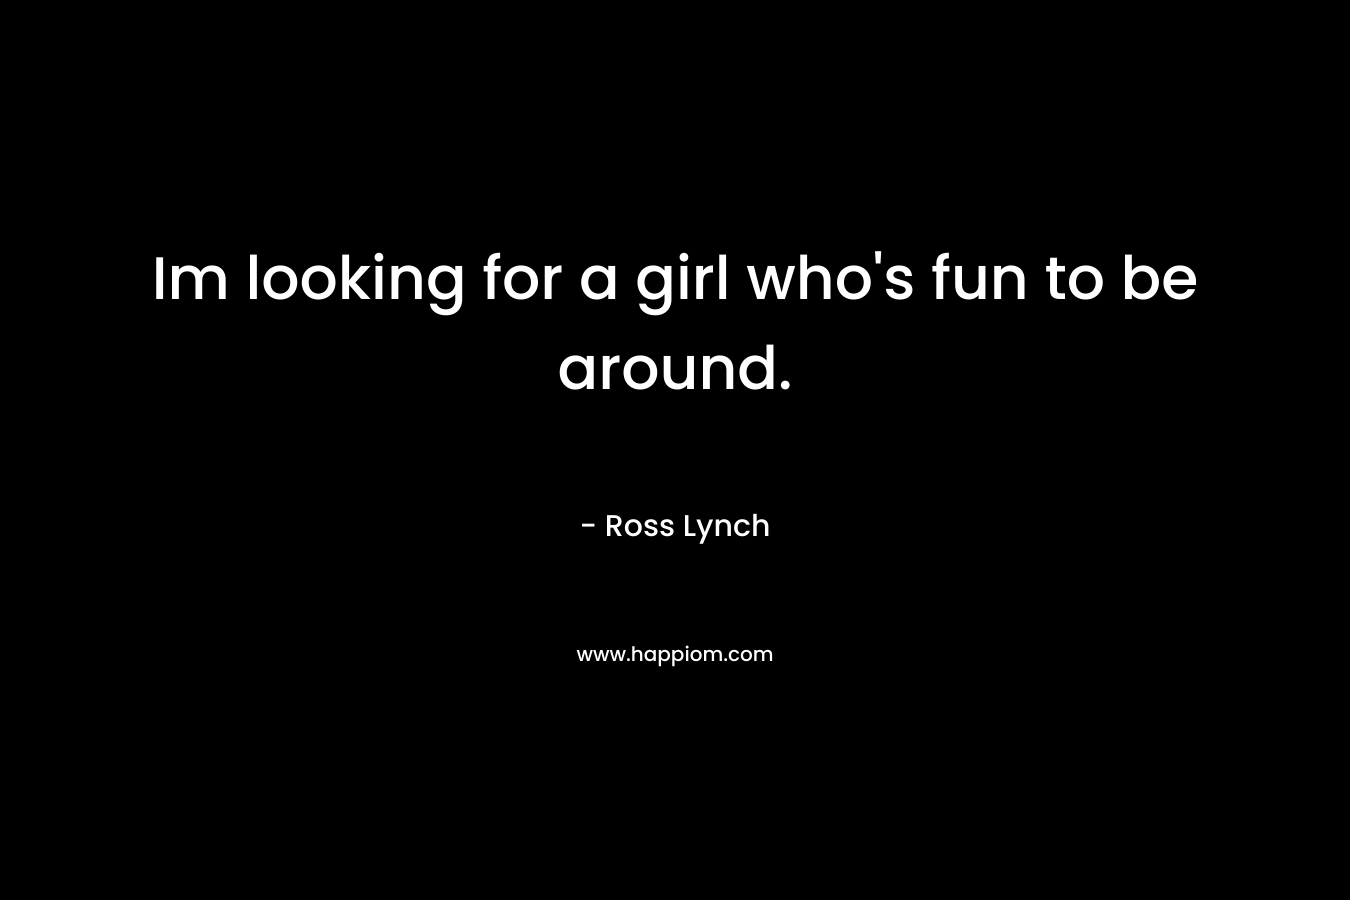 Im looking for a girl who’s fun to be around. – Ross Lynch